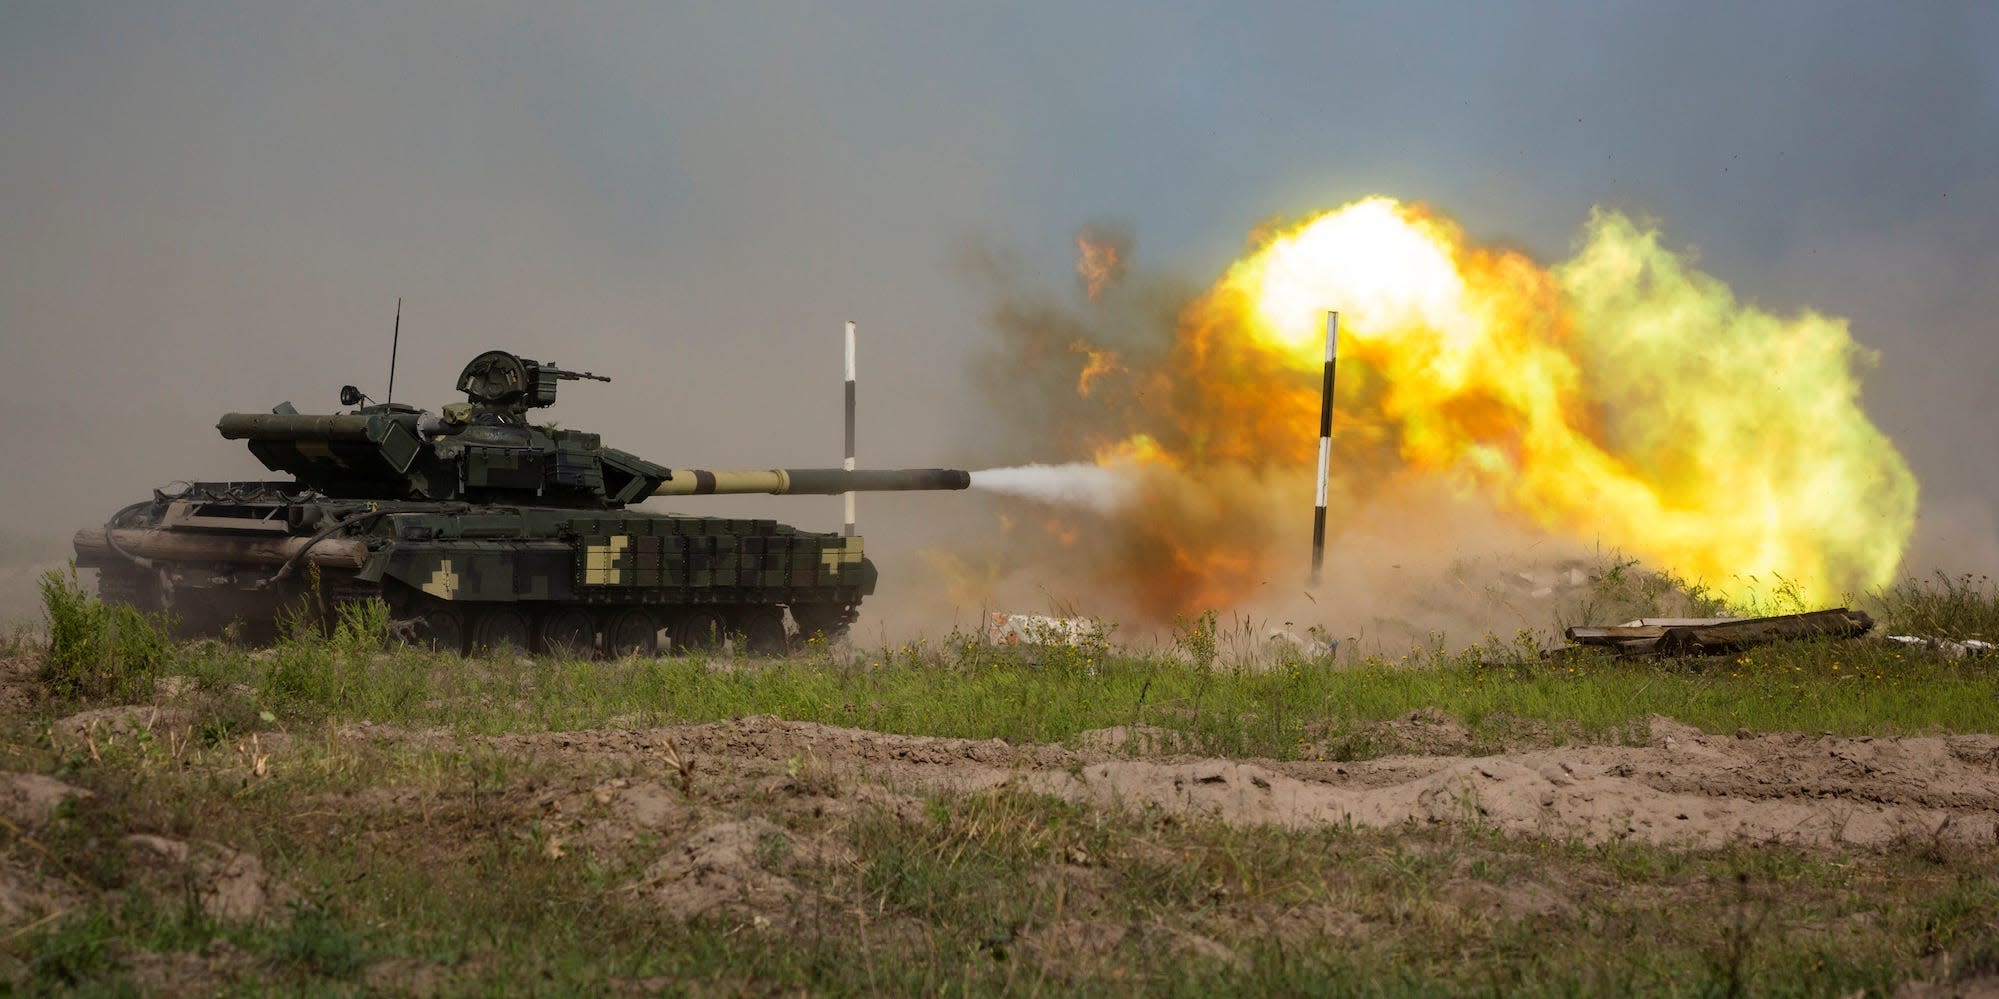 A Ukrainian T-62 tank fires during a military tactical exercise at a shooting range in Kharkiv region, Ukraine